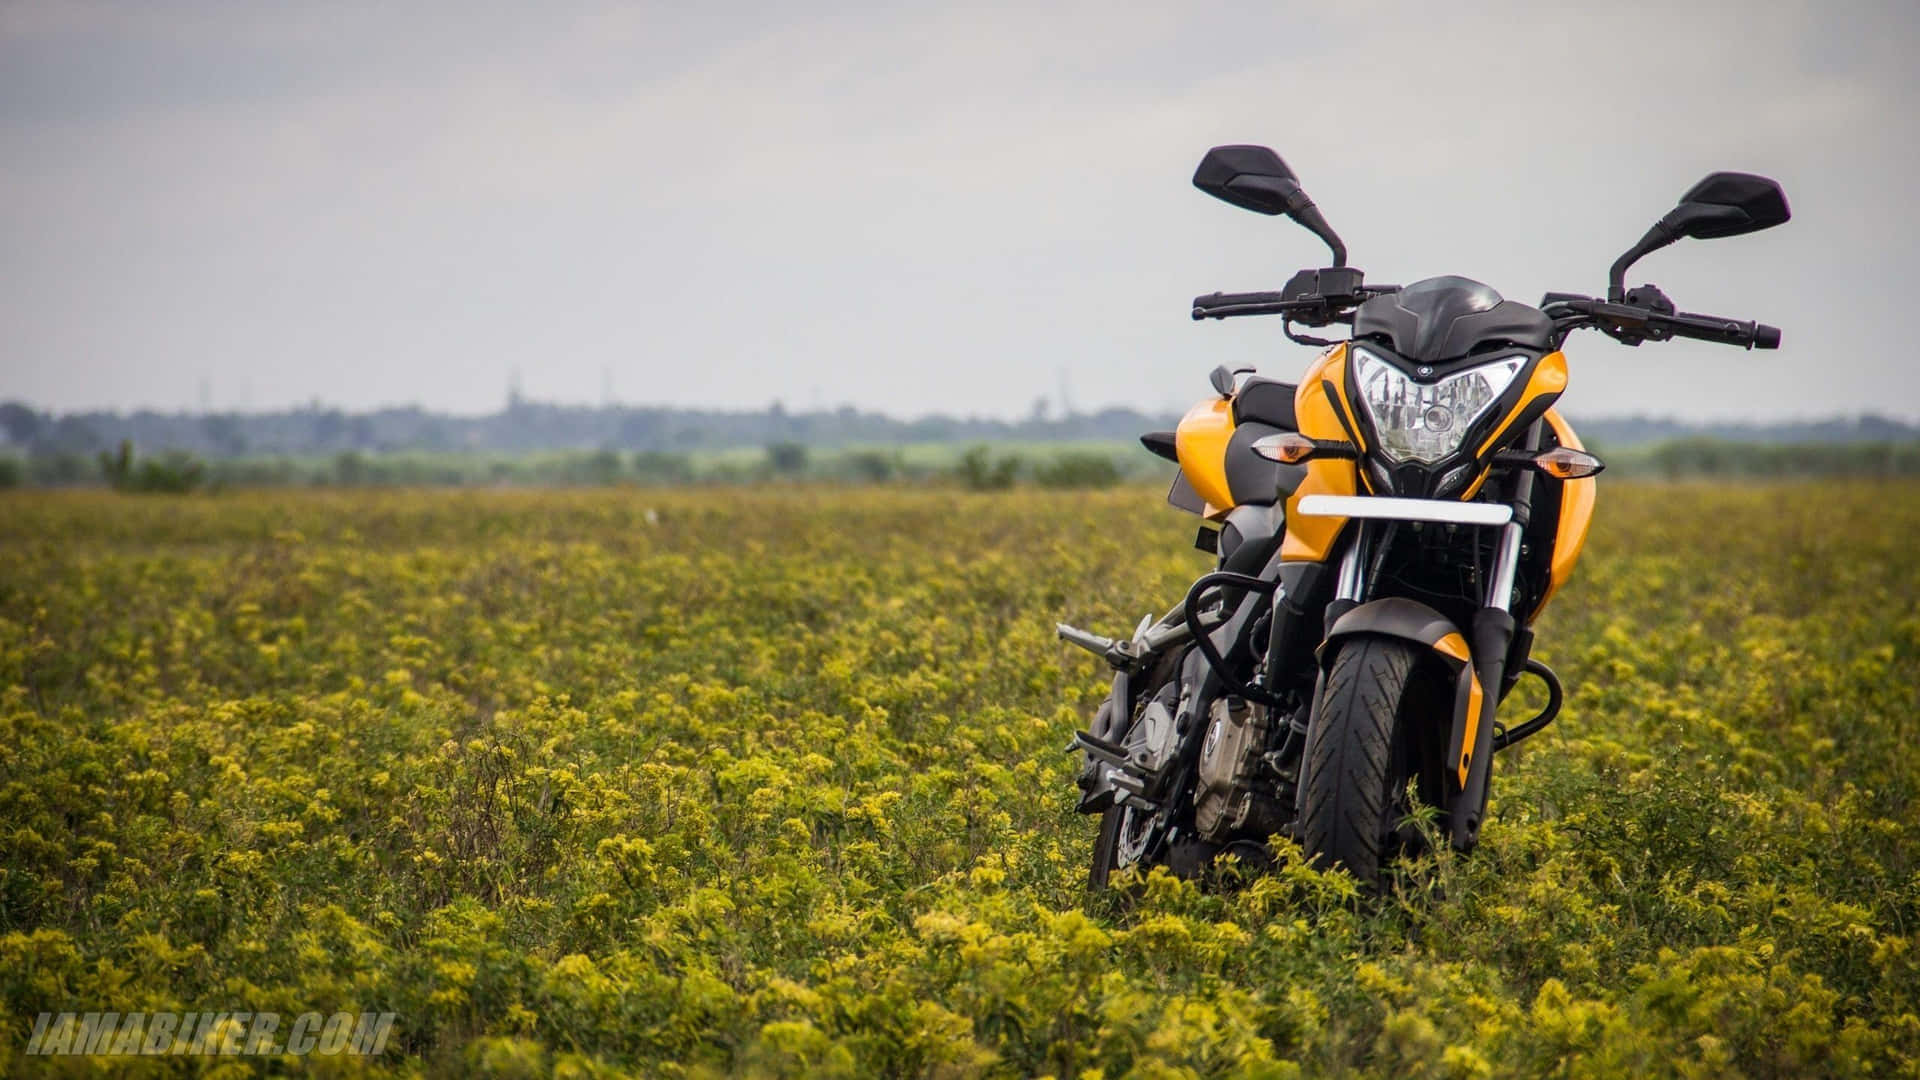 "Accelerate the Power of Performance with the Bajaj Pulsar NS 200"